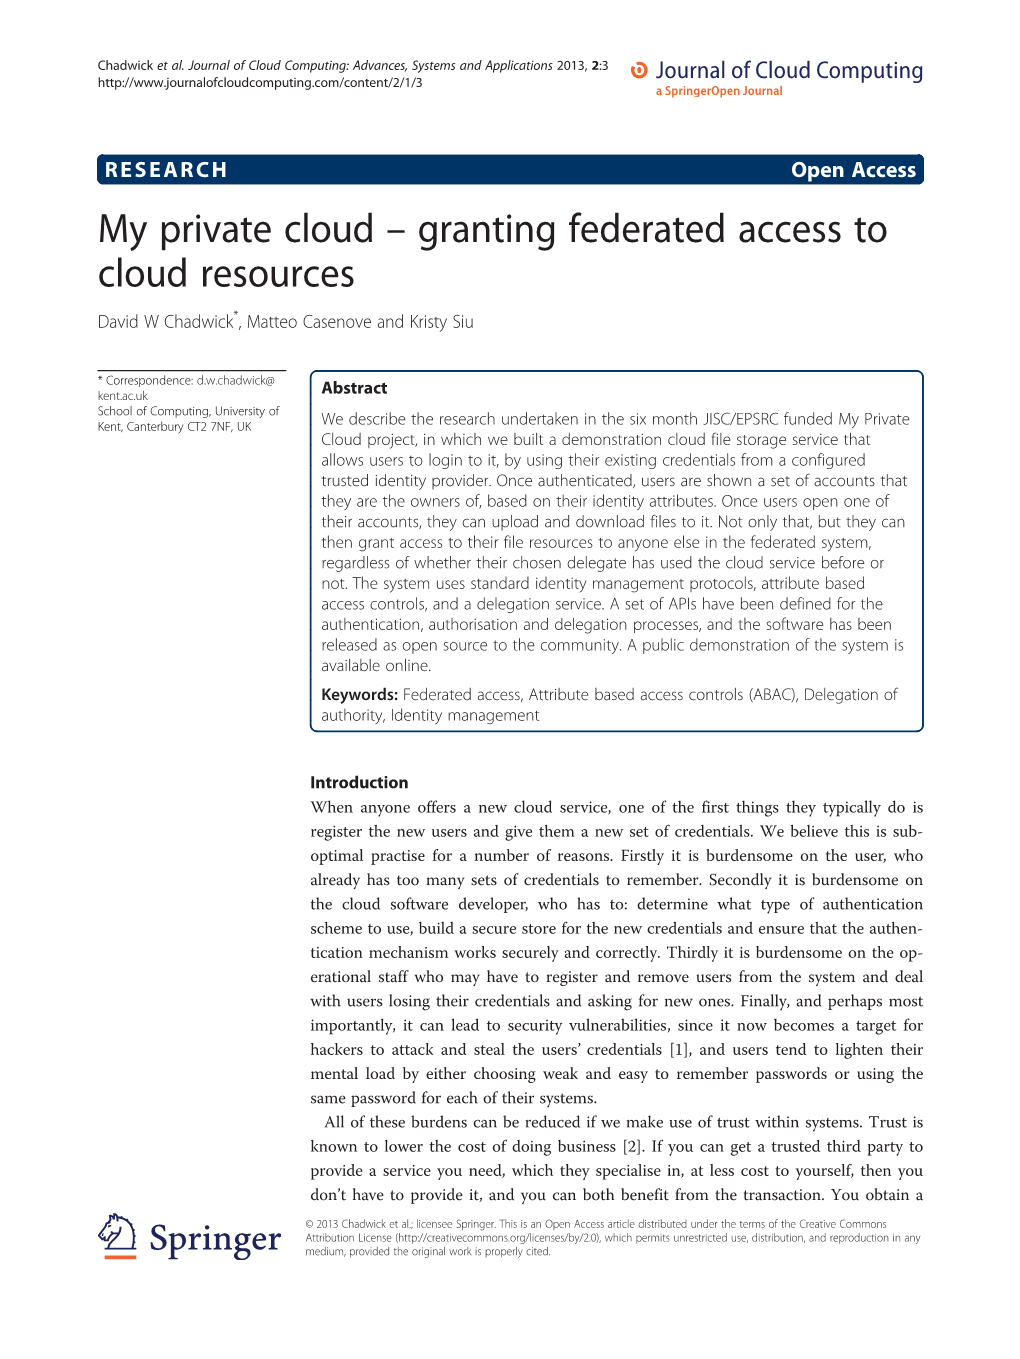 My Private Cloud – Granting Federated Access to Cloud Resources David W Chadwick*, Matteo Casenove and Kristy Siu